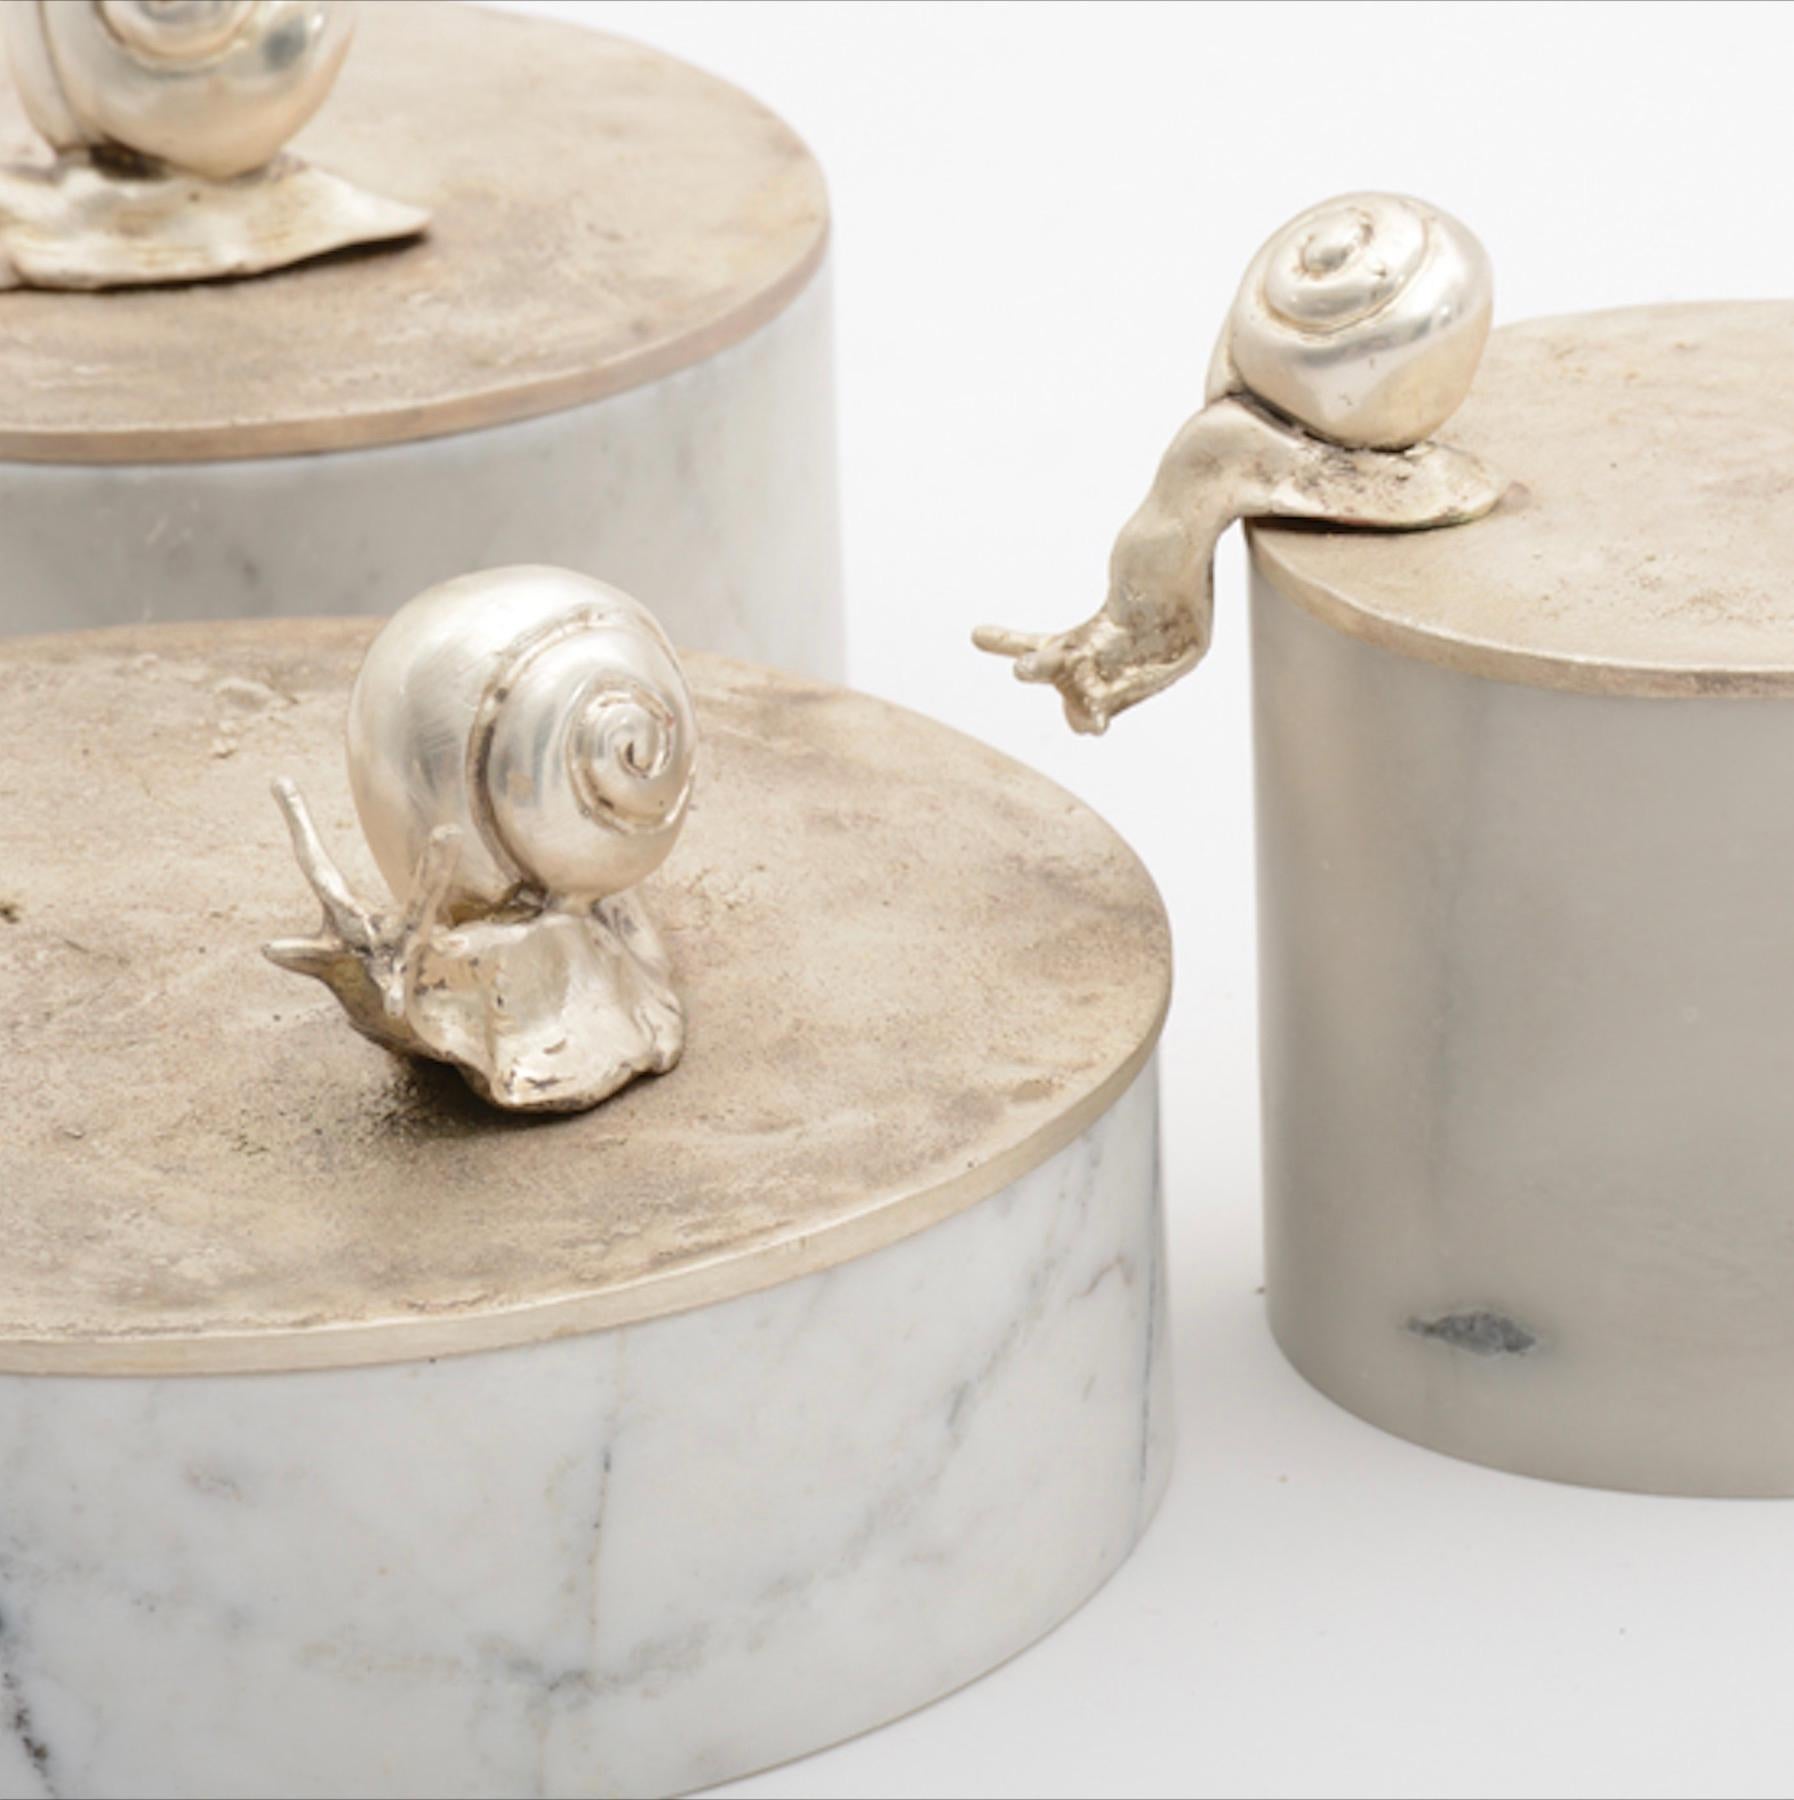 Available now and ready to ship! The set of 3 includes 1 small, 1 medium, and 1 large keepsake box. 

Each of the three Caracol keepsake boxes is comprised of a hand carved base in white marble with a solid cast bronze top in matte silver finish,